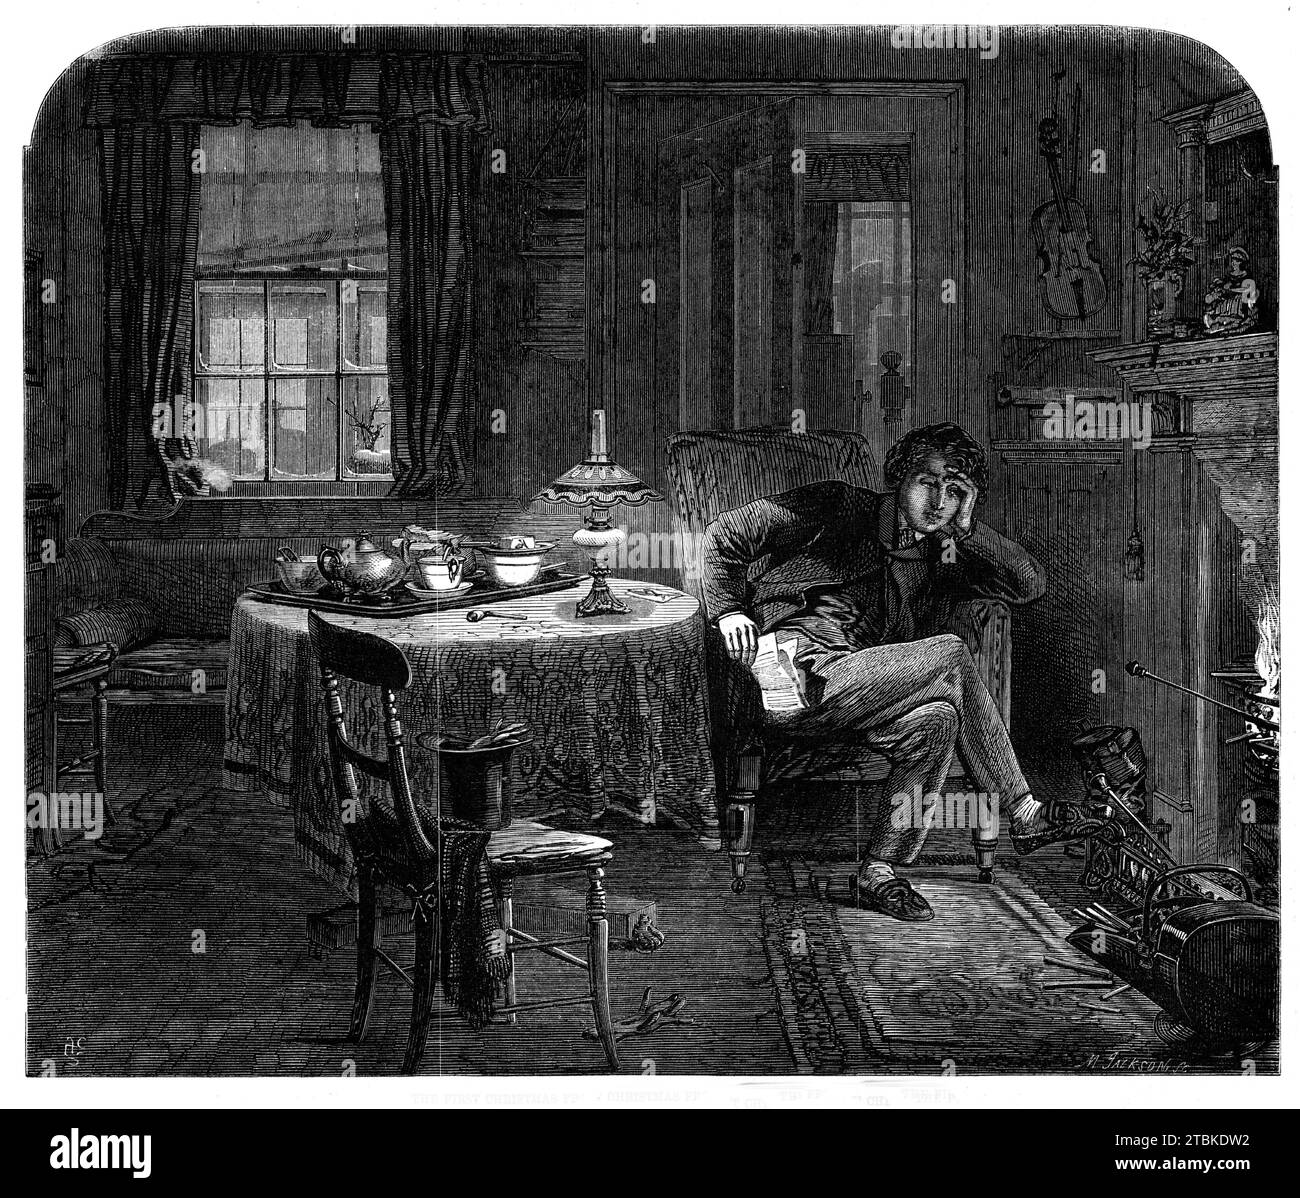 The first Christmas from home - drawn by A. Hunt, 1861. A young man in slippers sits by the fire holding a letter from his family. On another chair are his top hat, scarf and one glove - the other lies on the floor. A tray with tea things is on the table. From &quot;Illustrated London News&quot;, 1861. Stock Photo